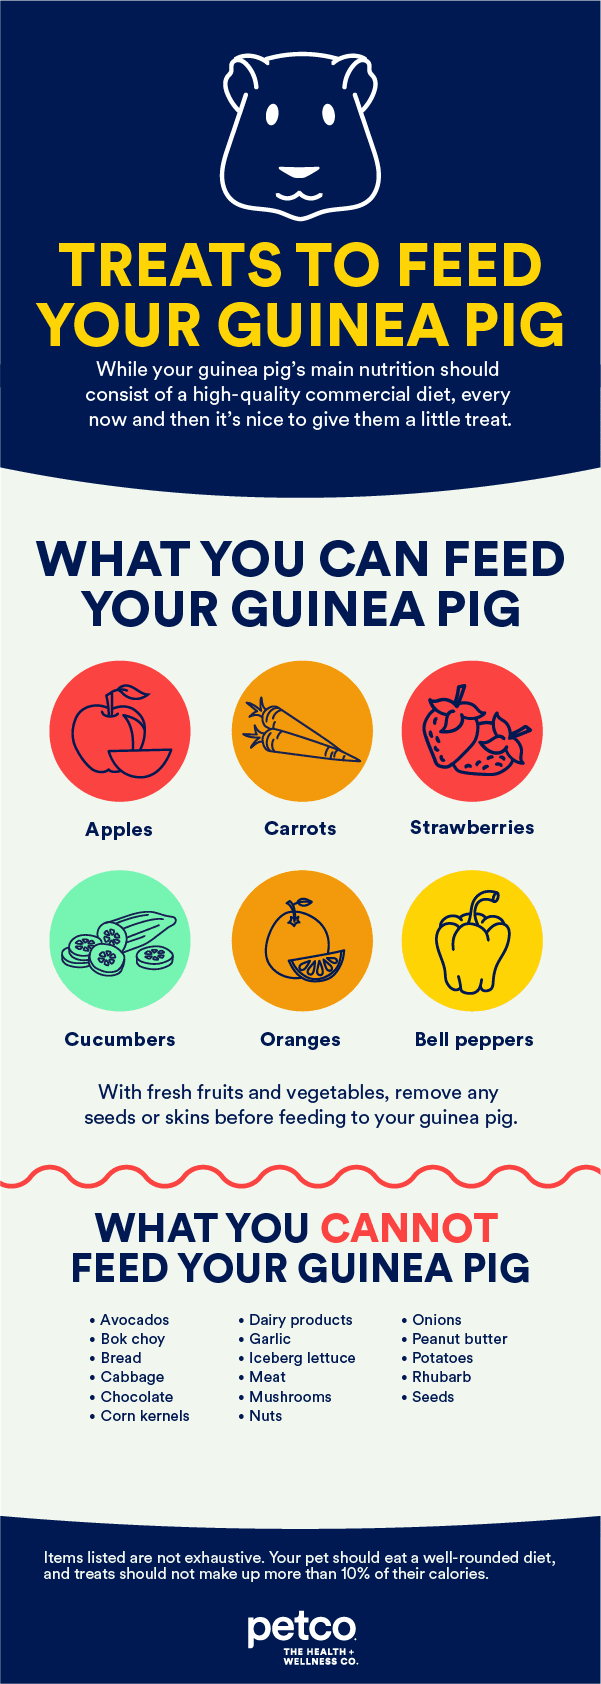 How to feed a guinea pig: choosing the right diet